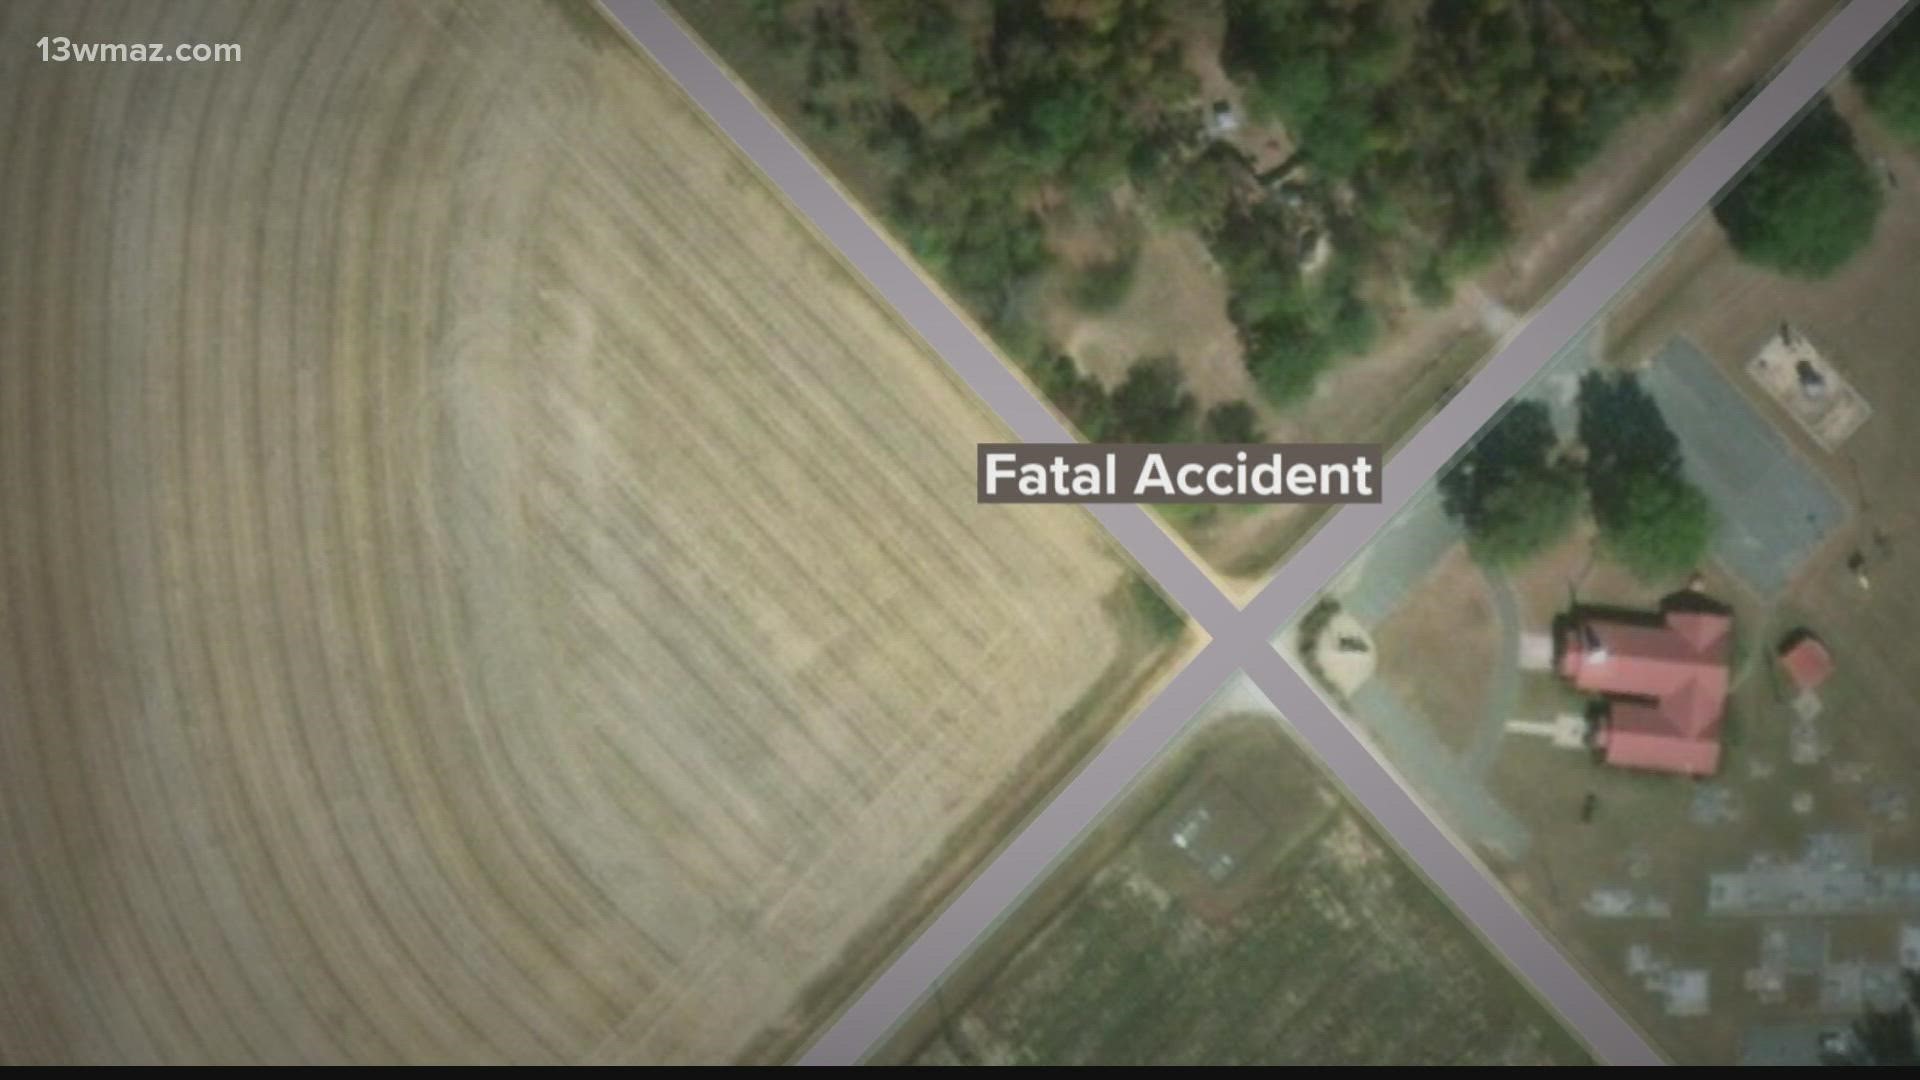 A woman died Saturday in a single-car accident in Cochran, according to Georgia State Patrol.